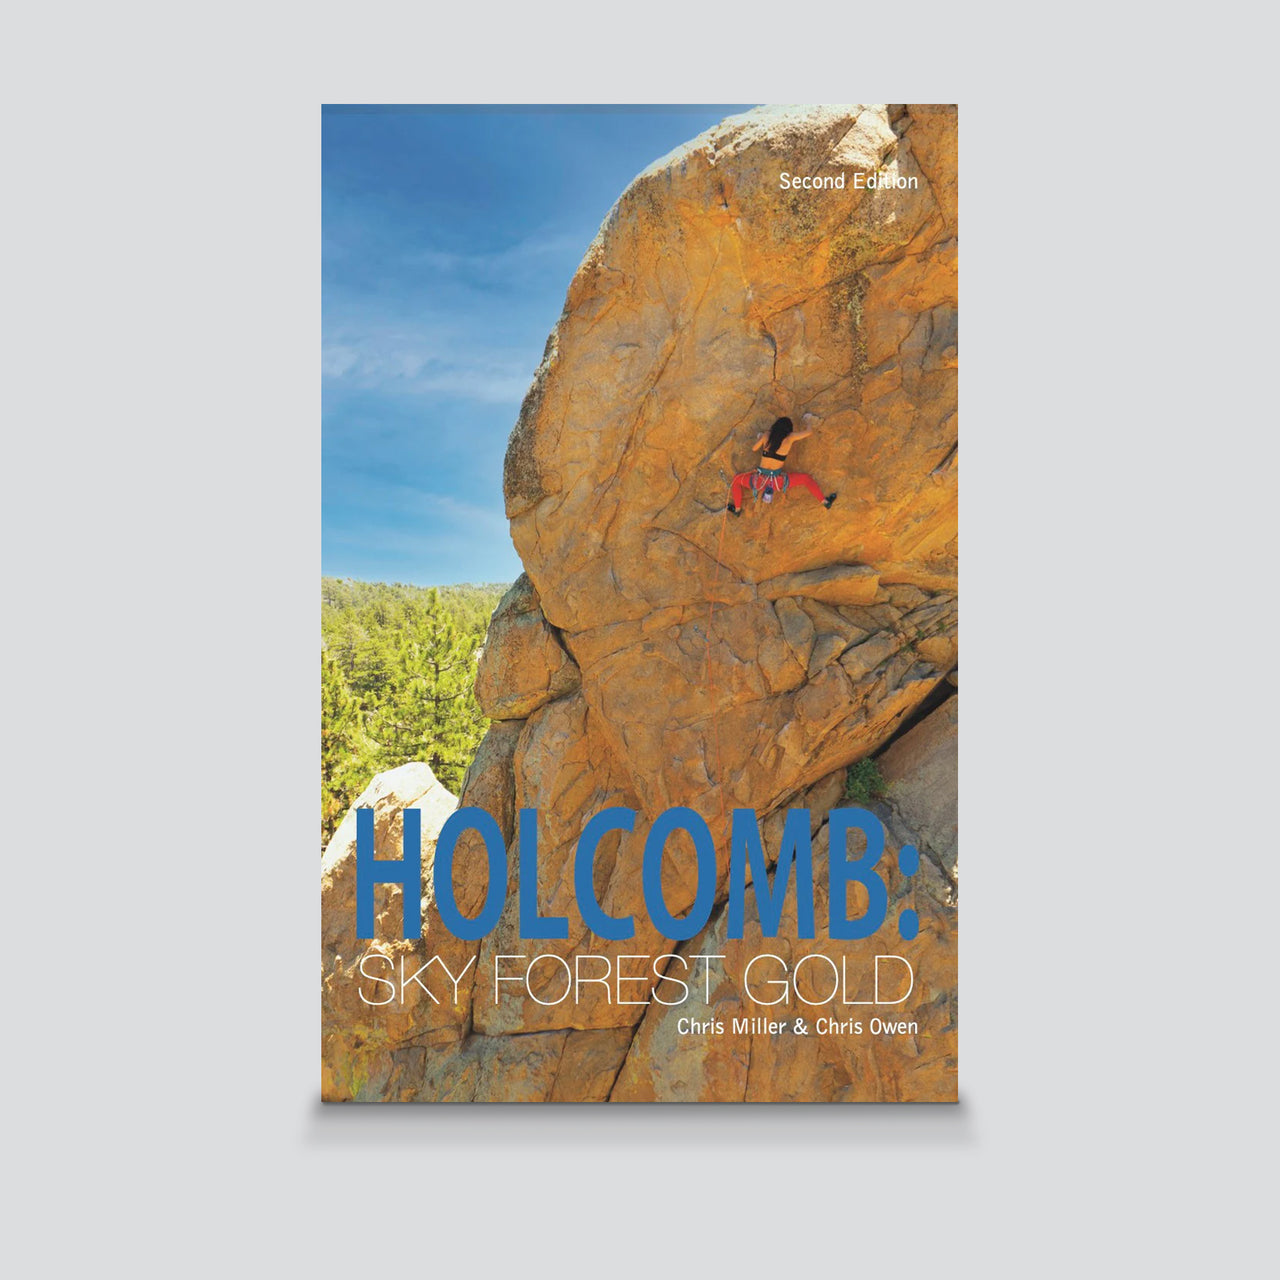 Guidebook - Holcomb: Sky Forest Gold 2nd Edition